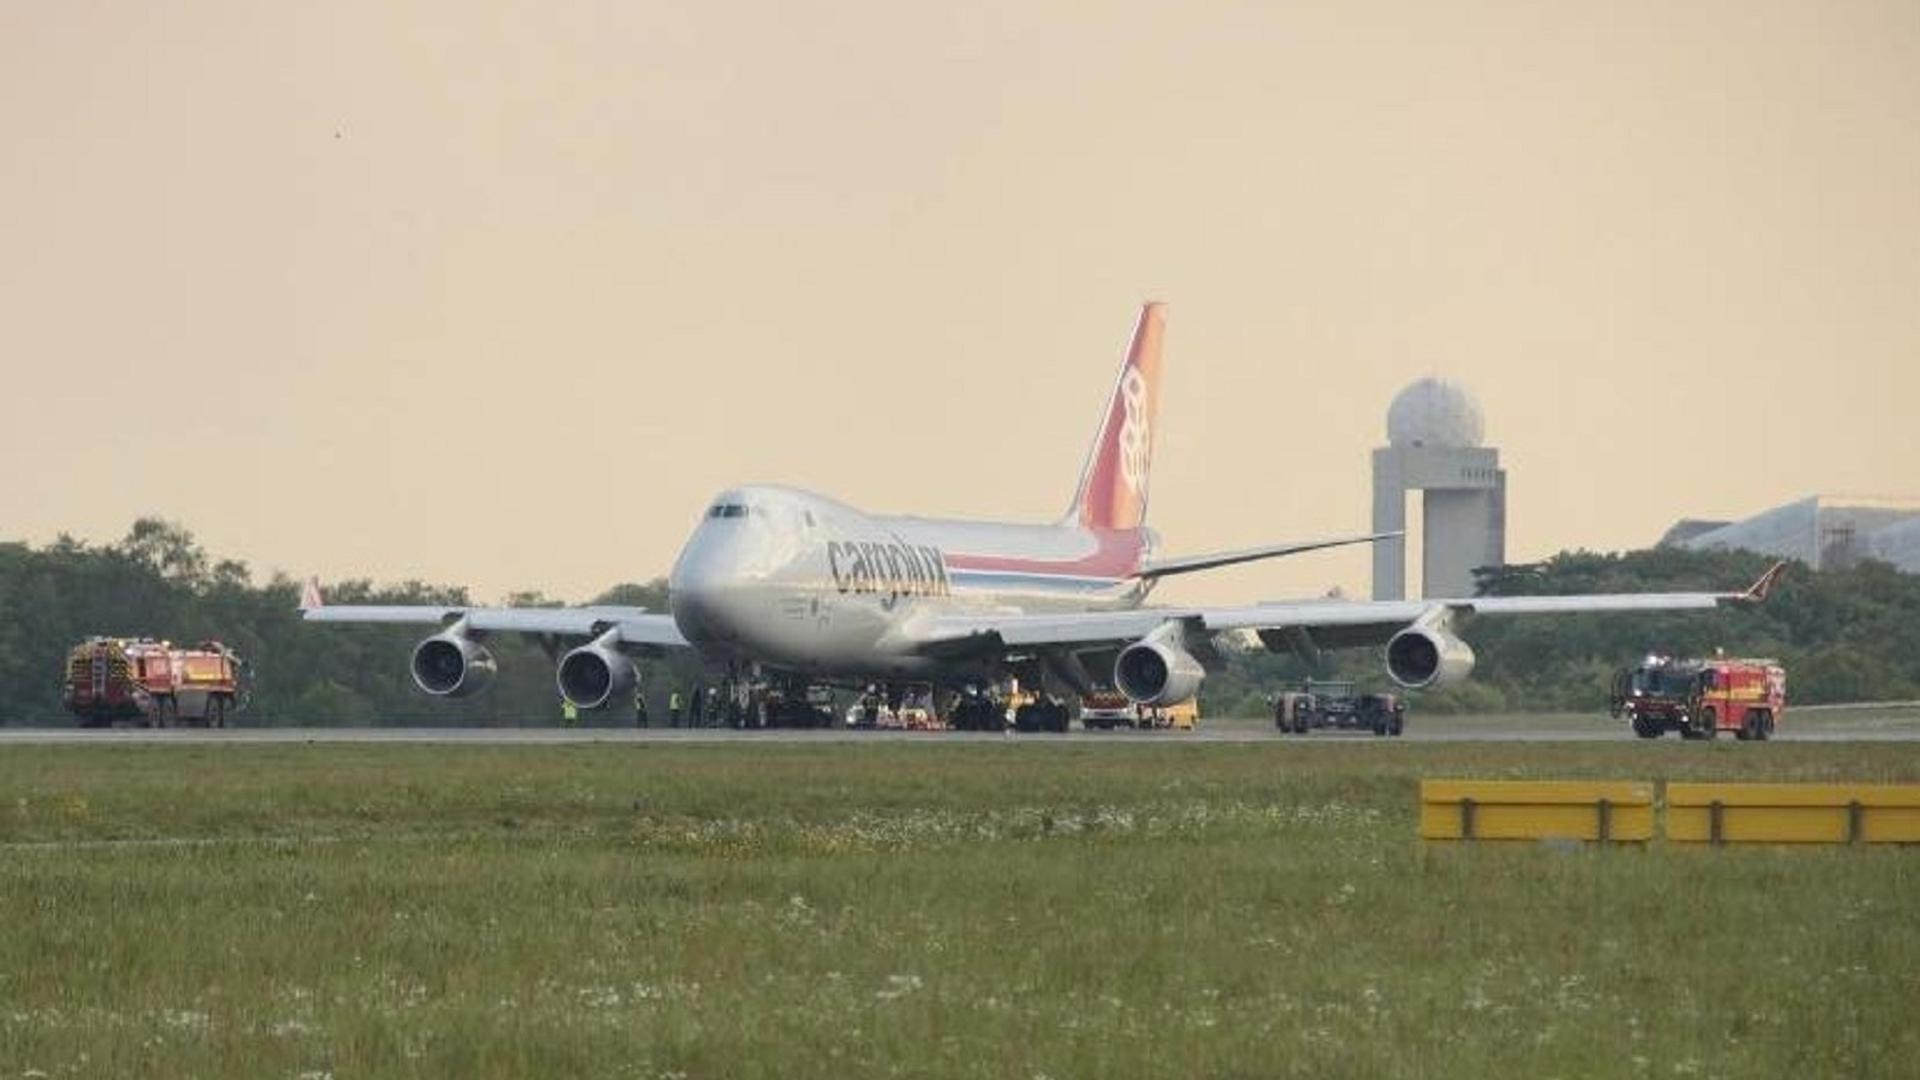 Emergency crews respond after a Cargolux jet was damaged during a hard landing on 14 May